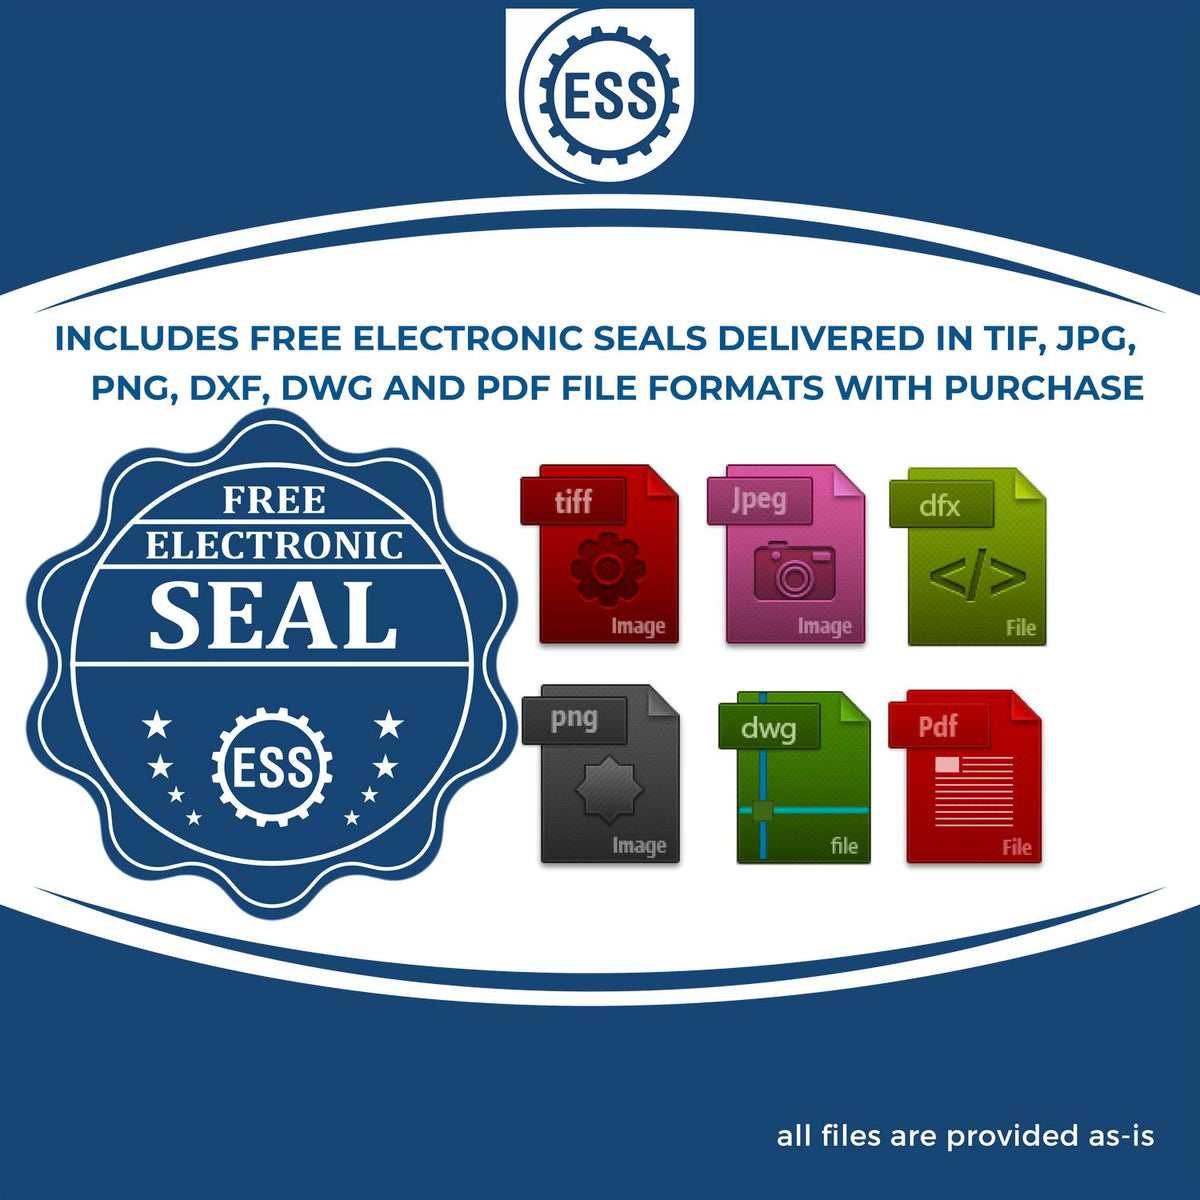 An infographic for the free electronic seal for the Soft West Virginia Professional Engineer Seal illustrating the different file type icons such as DXF, DWG, TIF, JPG and PNG.